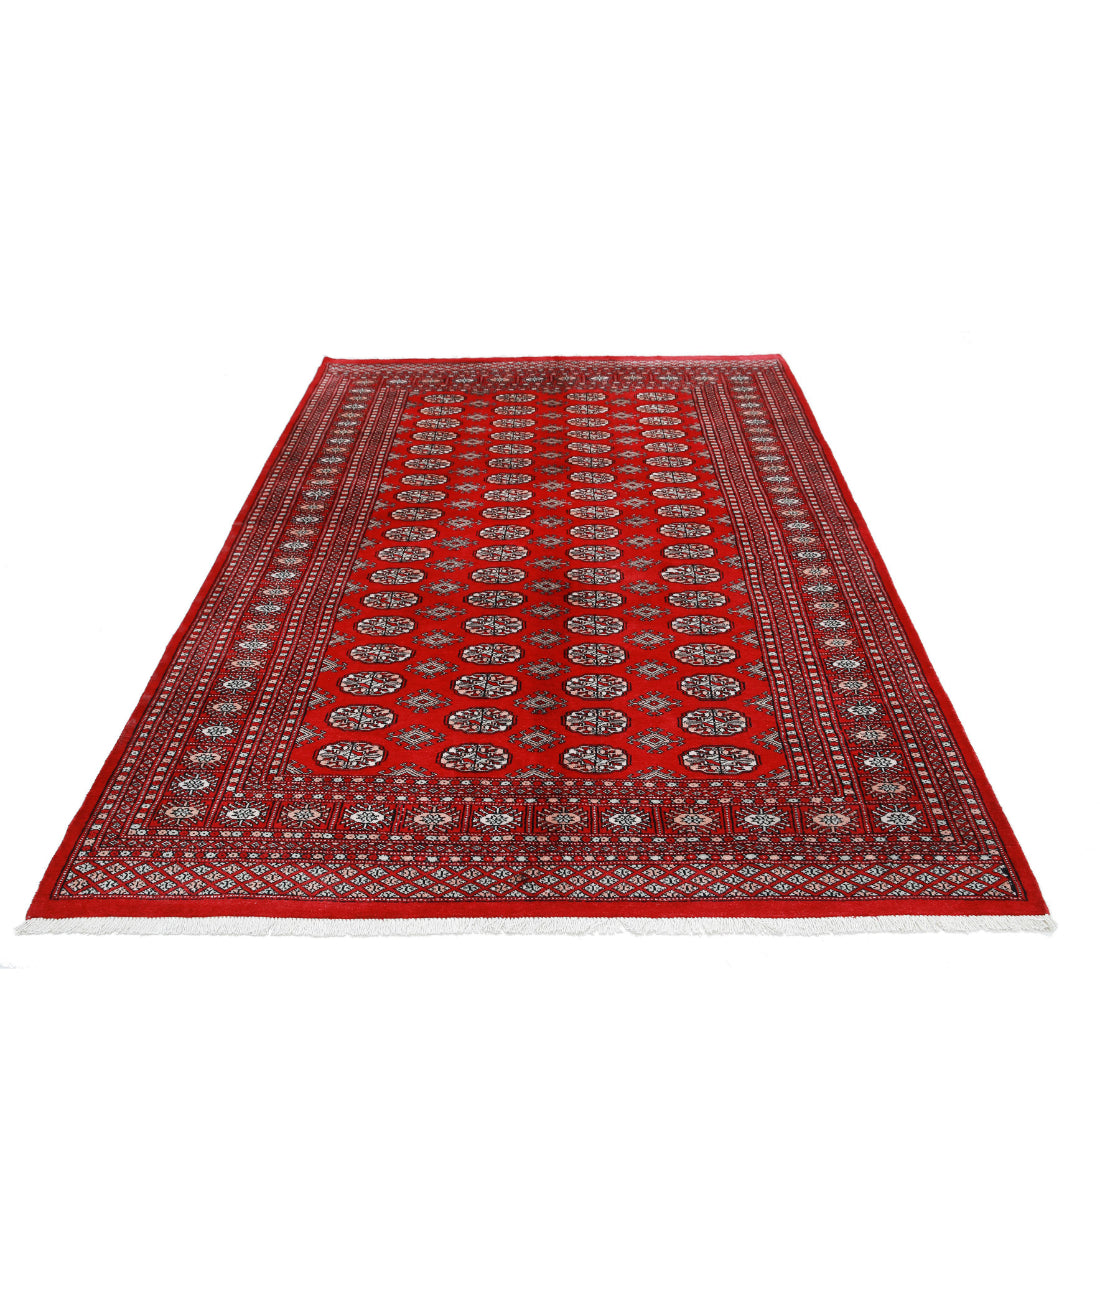 Hand Knotted Tribal Bokhara Wool Rug - 5'10'' x 8'6'' 5'10'' x 8'6'' (175 X 255) / Red / Black